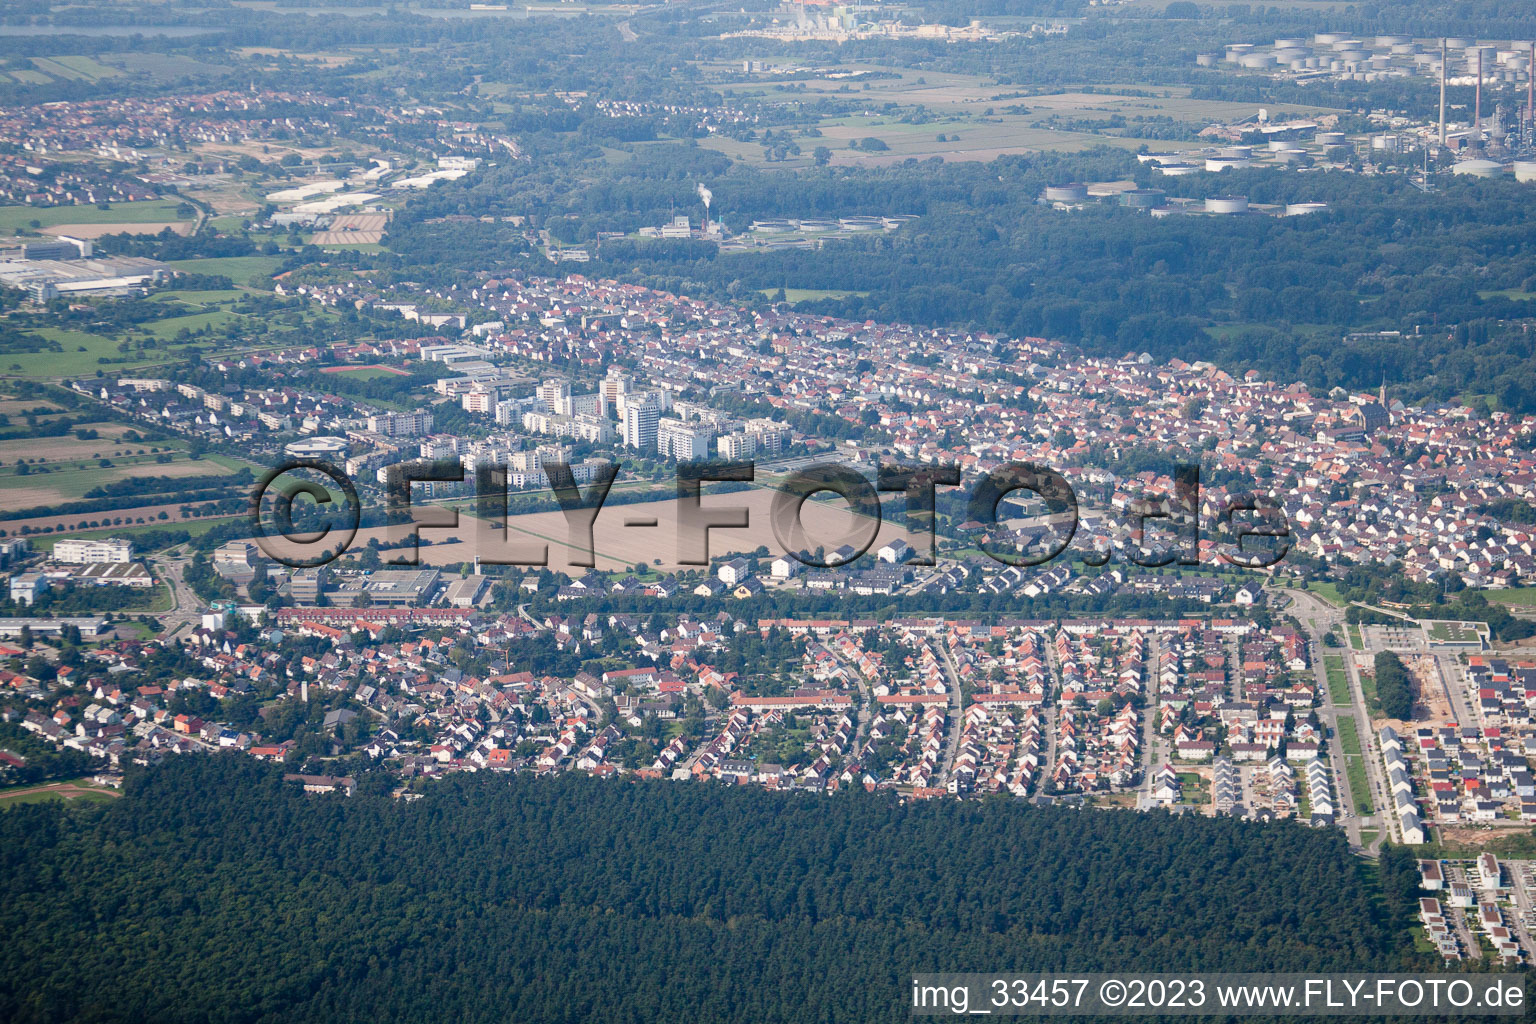 District Neureut in Karlsruhe in the state Baden-Wuerttemberg, Germany from the plane